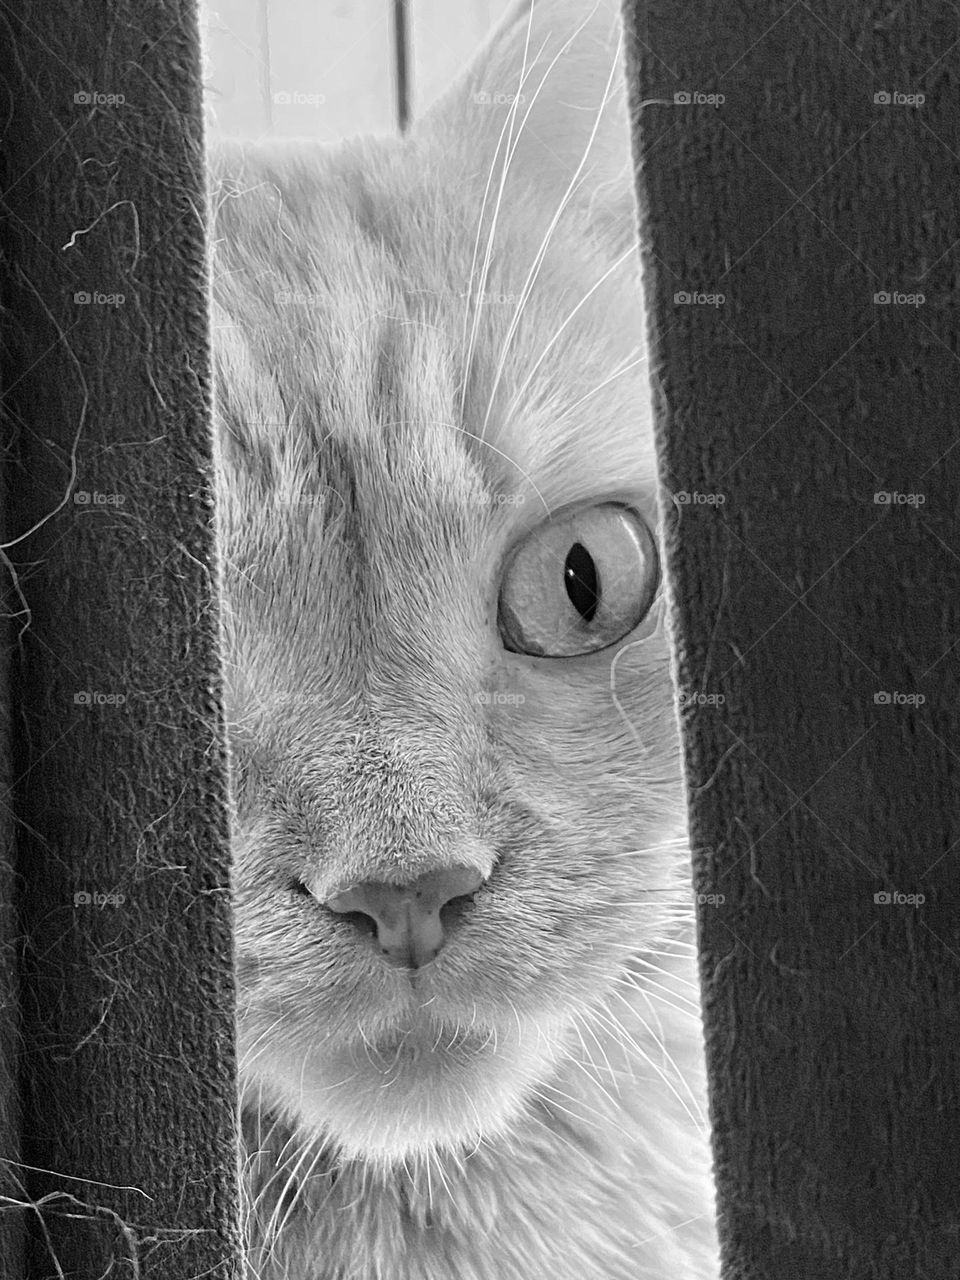 A cat looking out the gap in between the curtains